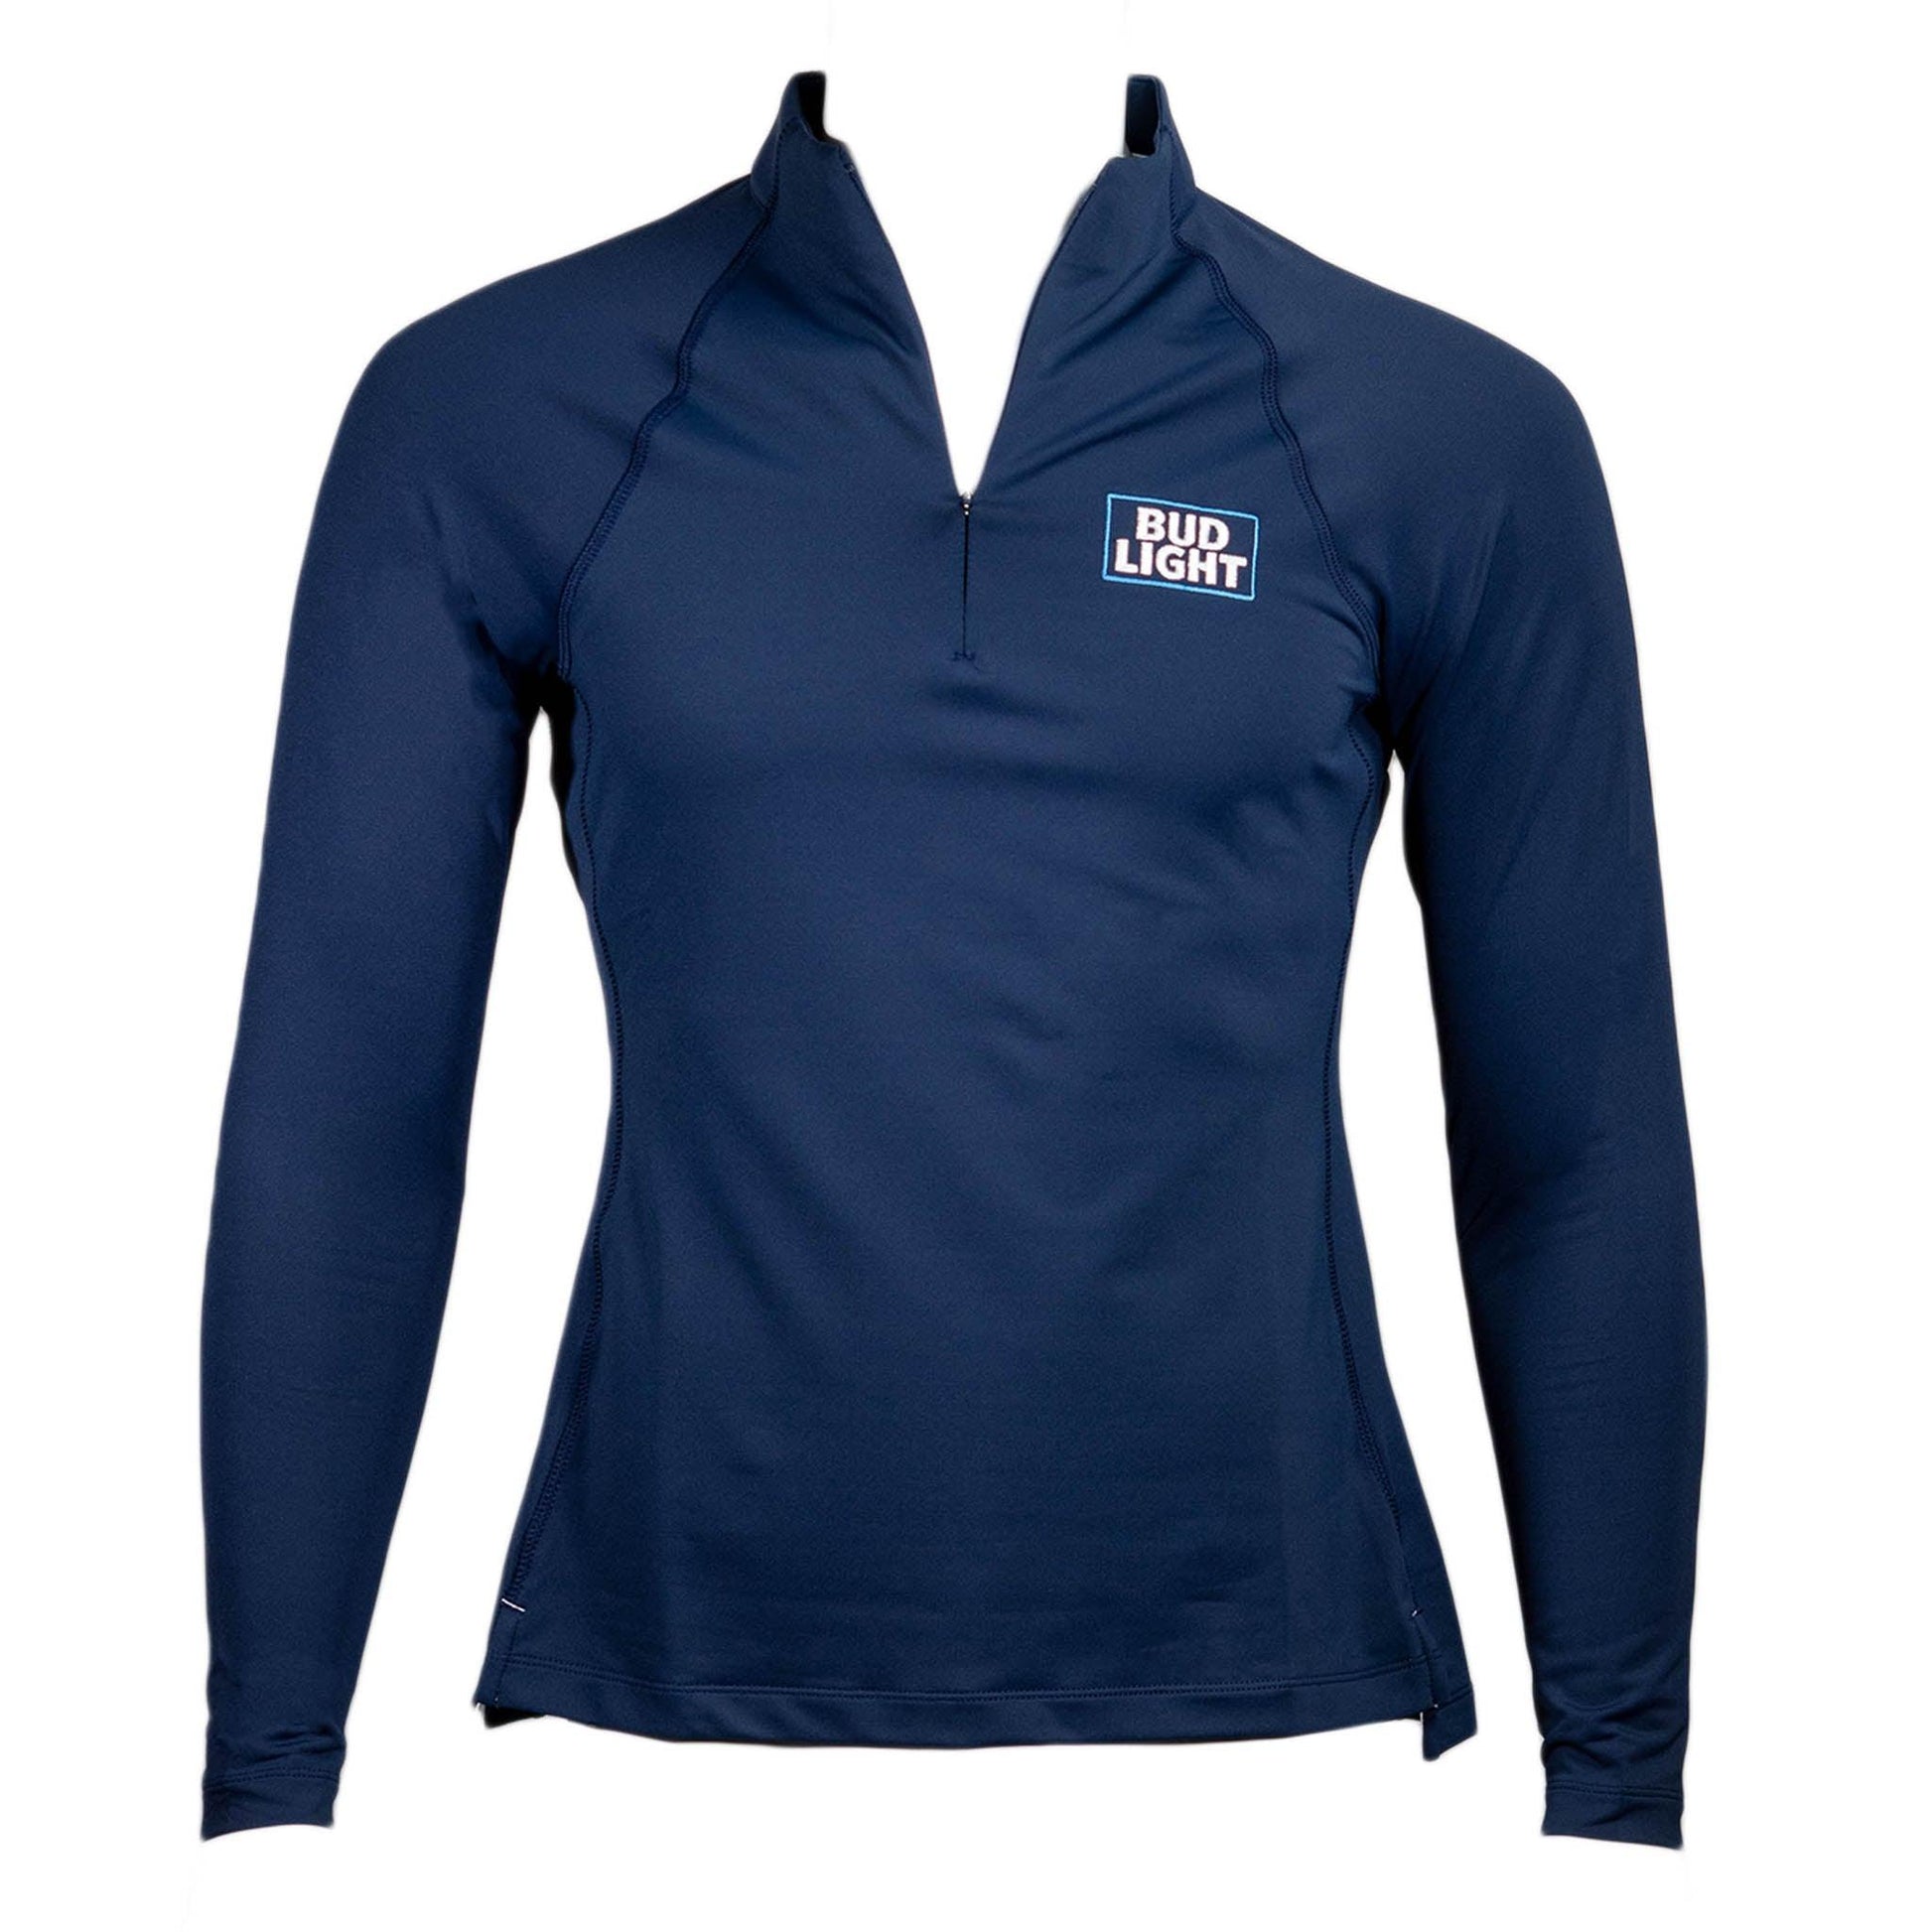 navy Blue Bud Light ladies Peter Millar 1/4 zip pullover with embroidered stacked Bud Light logo on front left chest of pullover